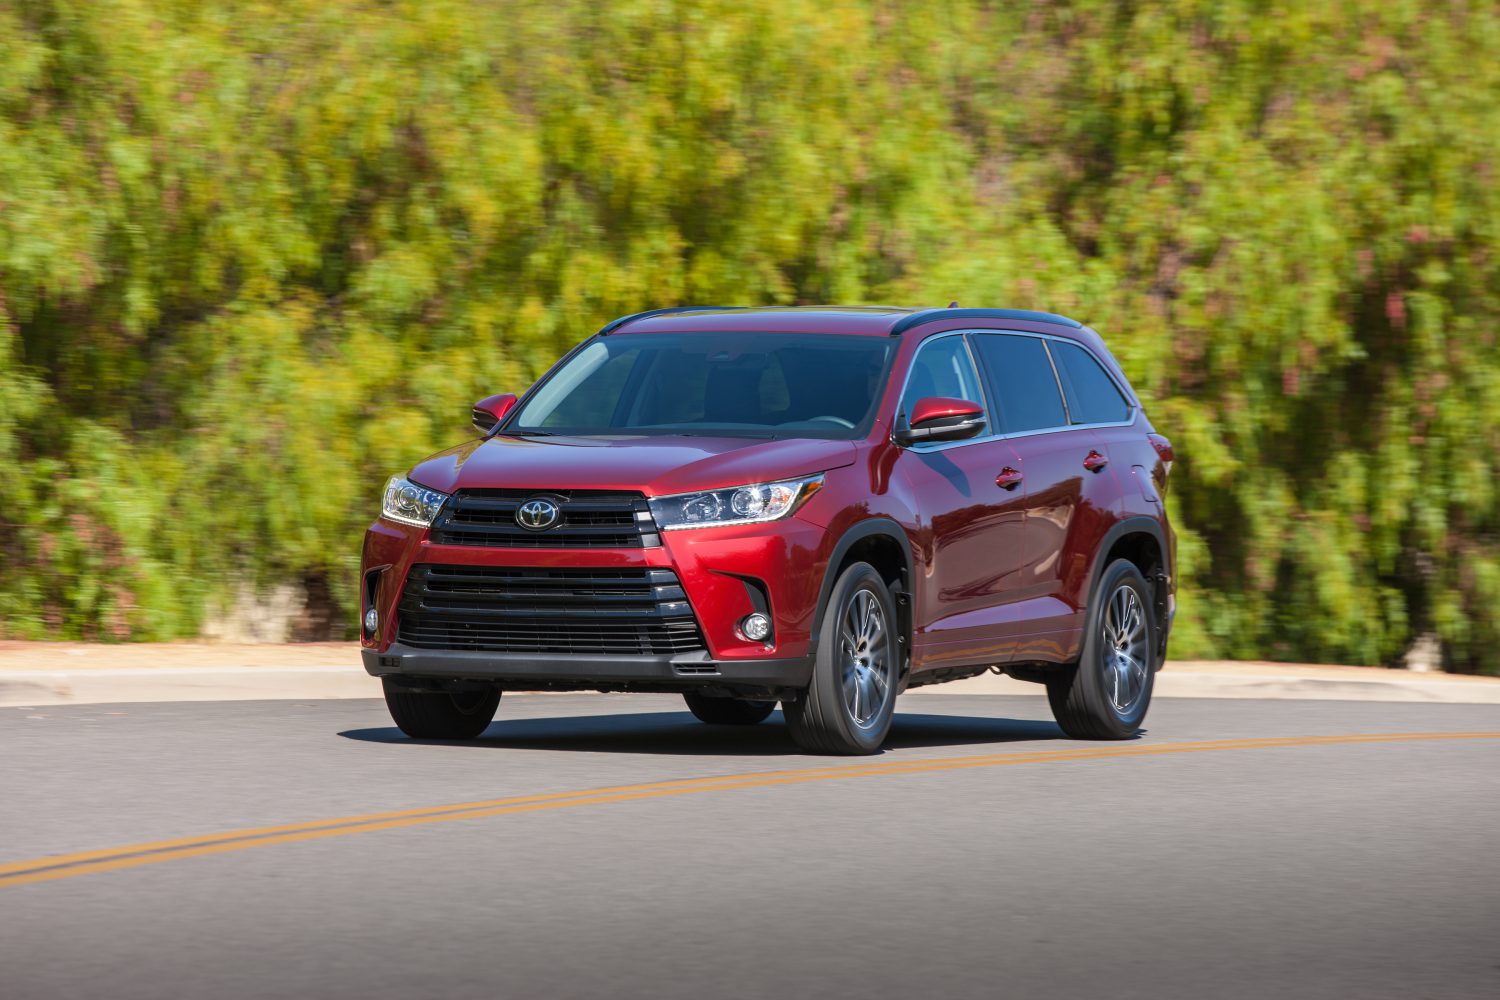 2017 Highlander with More Power, More Safety and More Model Choices Adds up  to More Value Pricing - Toyota USA Newsroom